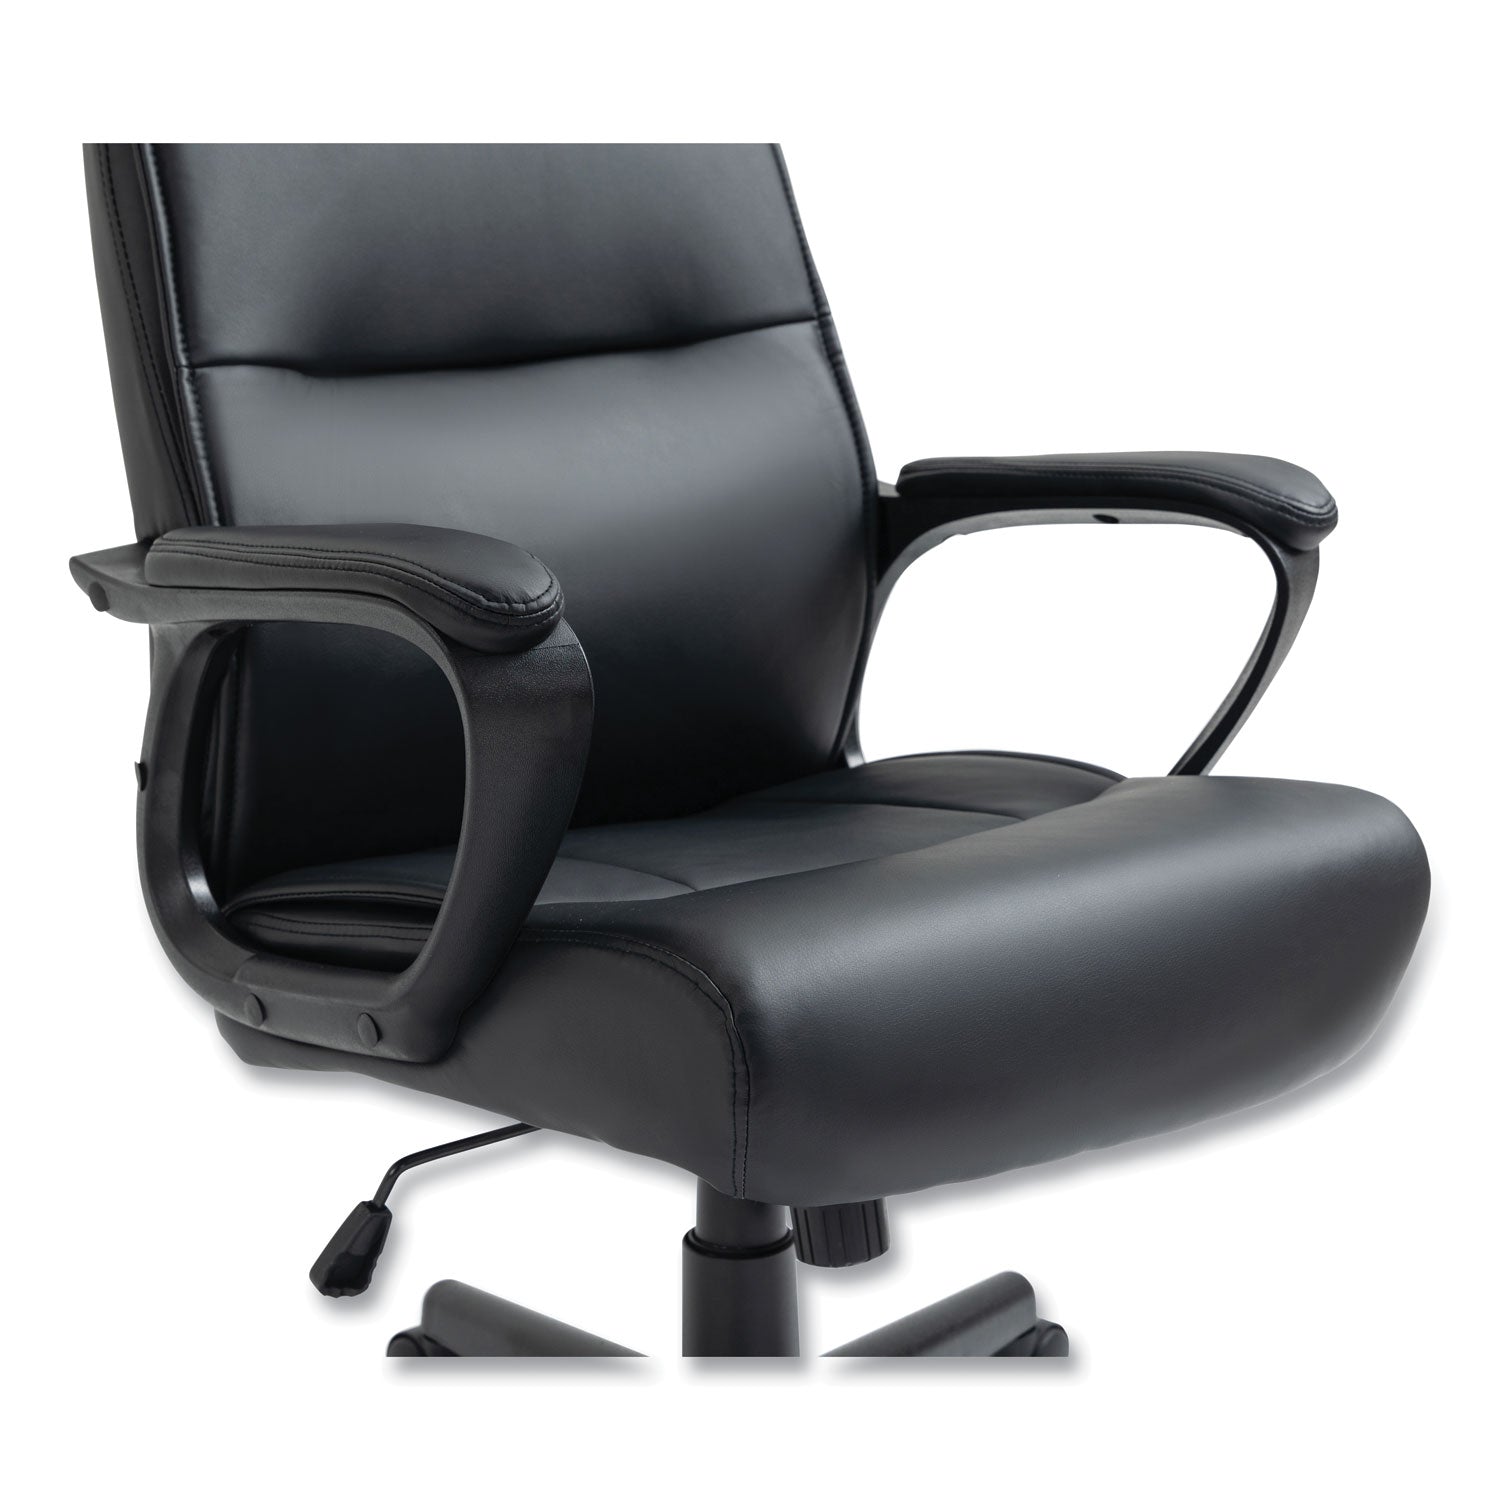 alera-oxnam-series-high-back-task-chair-supports-up-to-275-lbs-1756-to-2138-seat-height-black-seat-back-black-base_aleon41b19 - 5